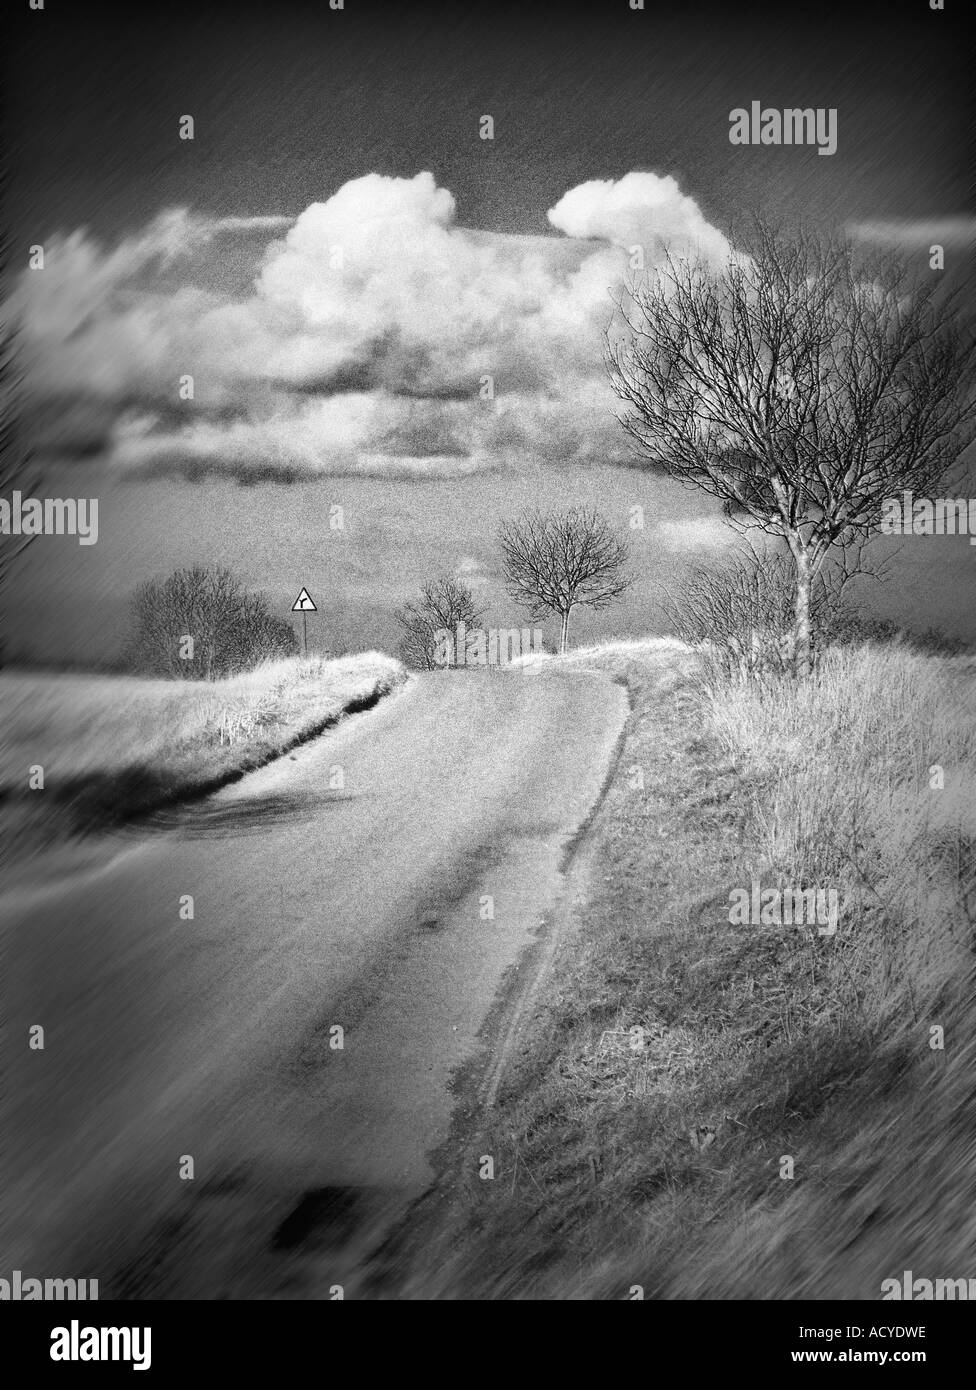 Rural england Black and White Stock Photos & Images - Alamy